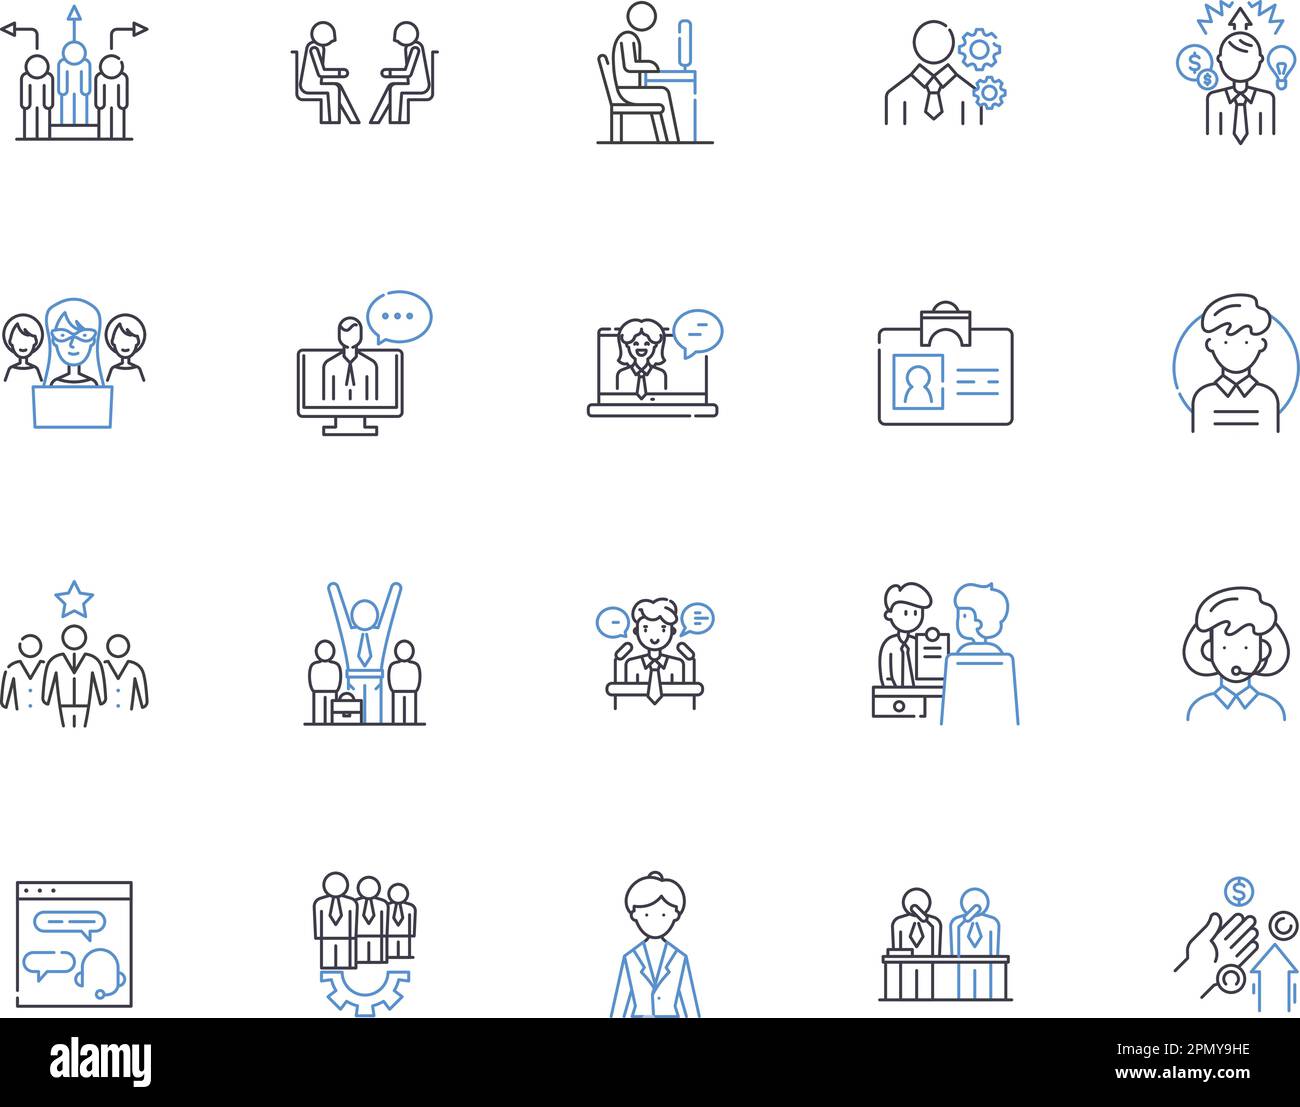 Career outline icons collection. Job, Career Path, Vocation, Profession, Livelihood, Employment, Occupation vector and illustration concept set Stock Vector